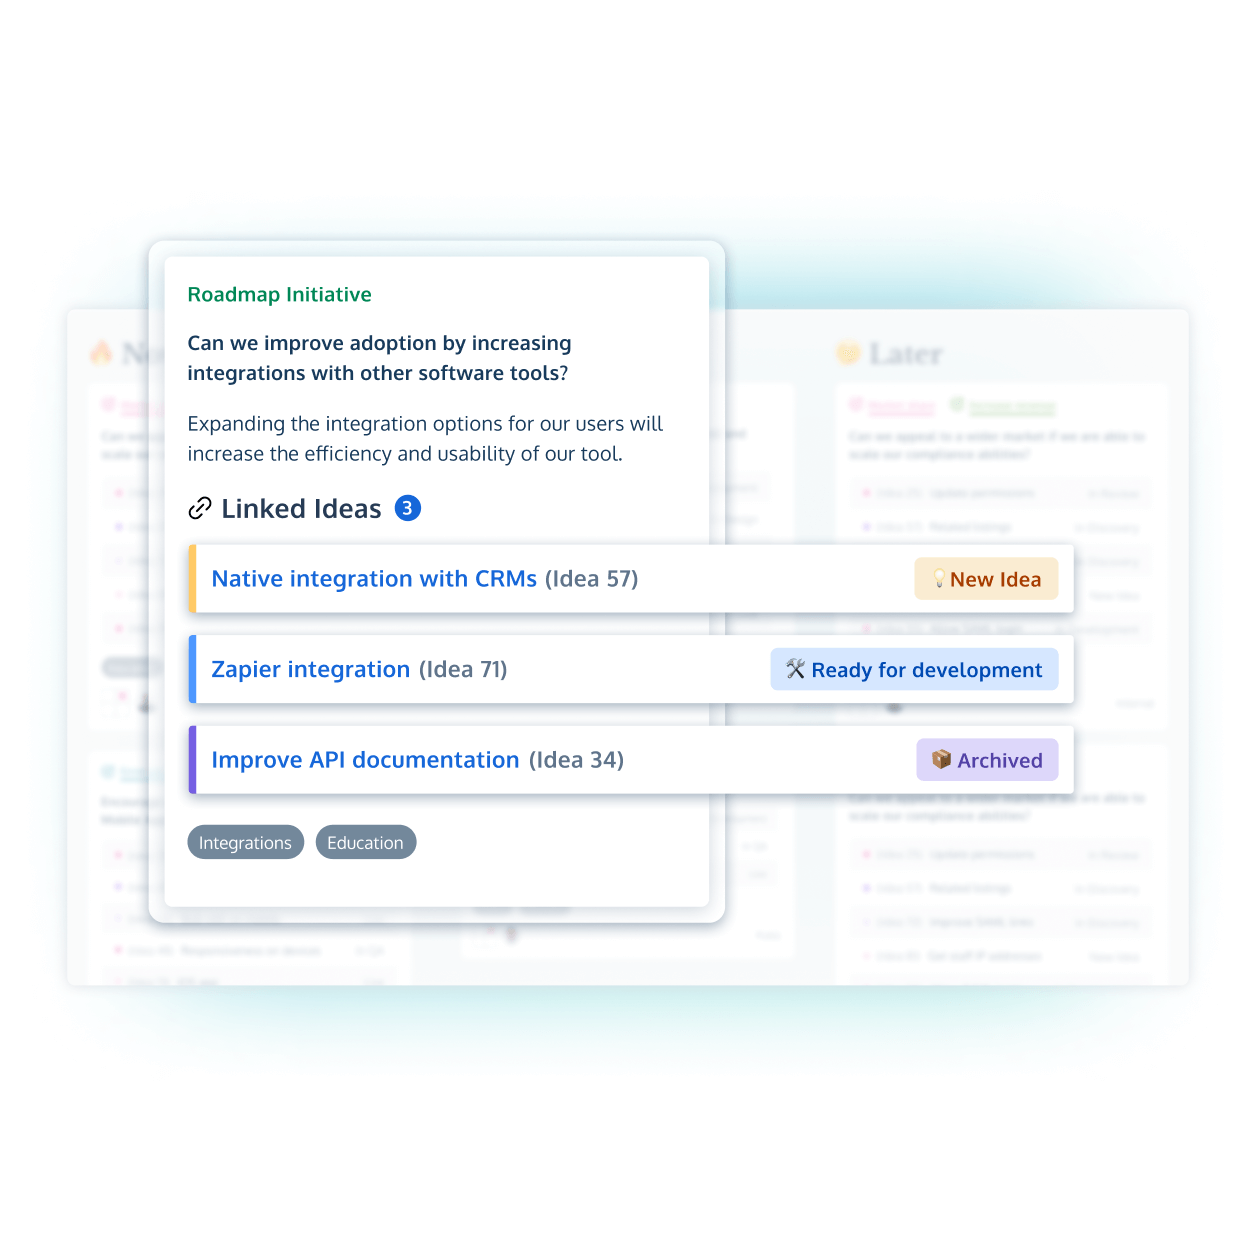 ProdPad's AI-powered customer feedback analysis tool for product managers